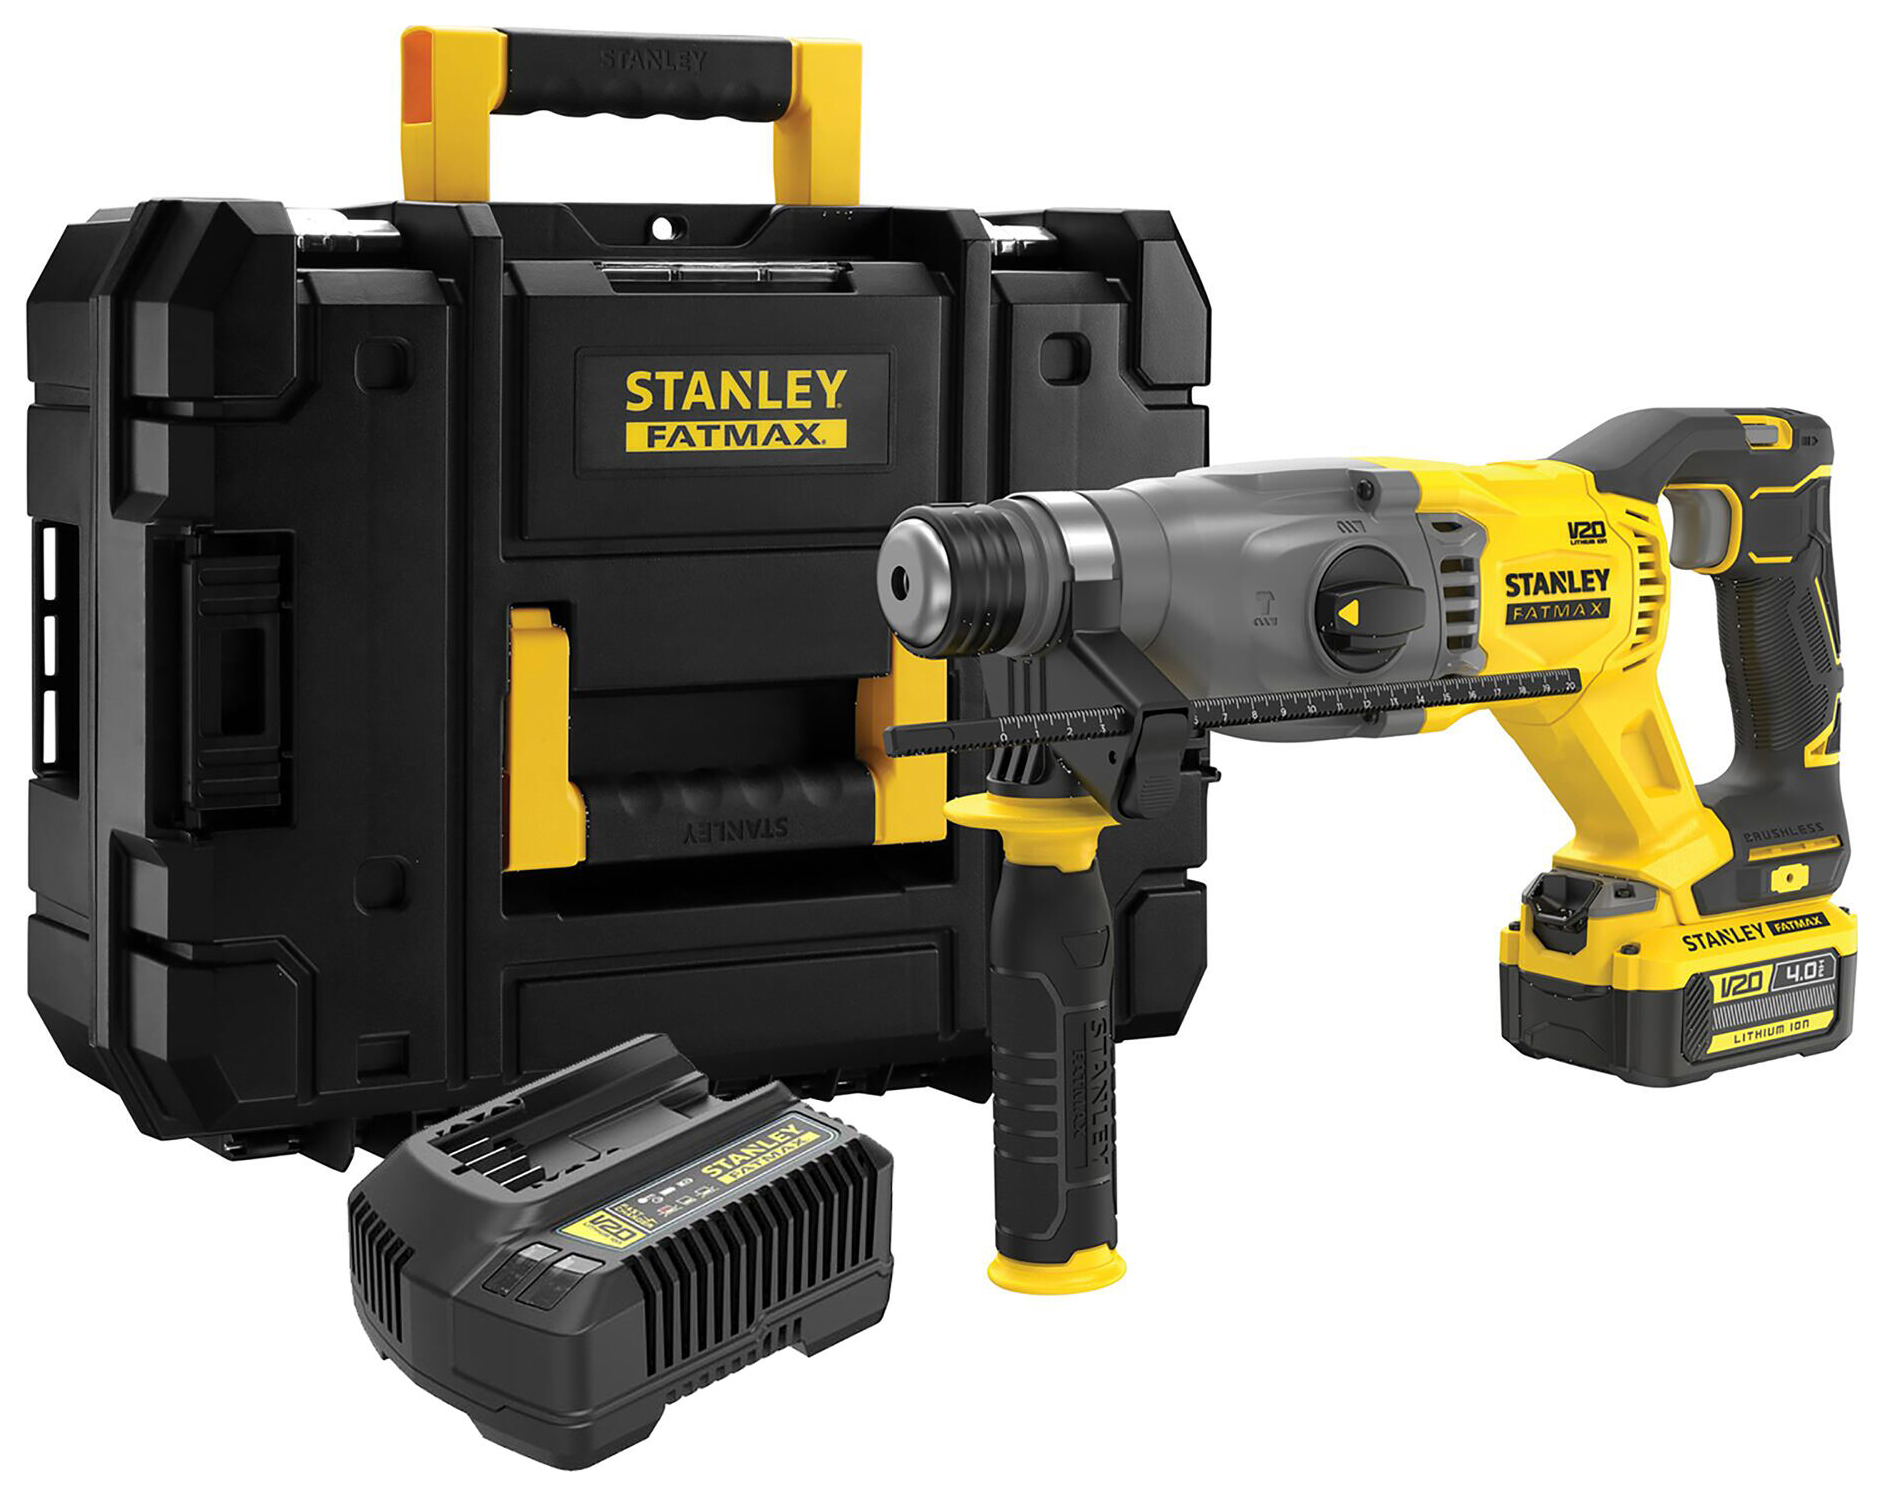 Image of Stanley FatMax® V20 SFMCH900m12-GB 18V 1 x 4.0AH Cordless Brushless SDS+ Drill with Pro Stack Case